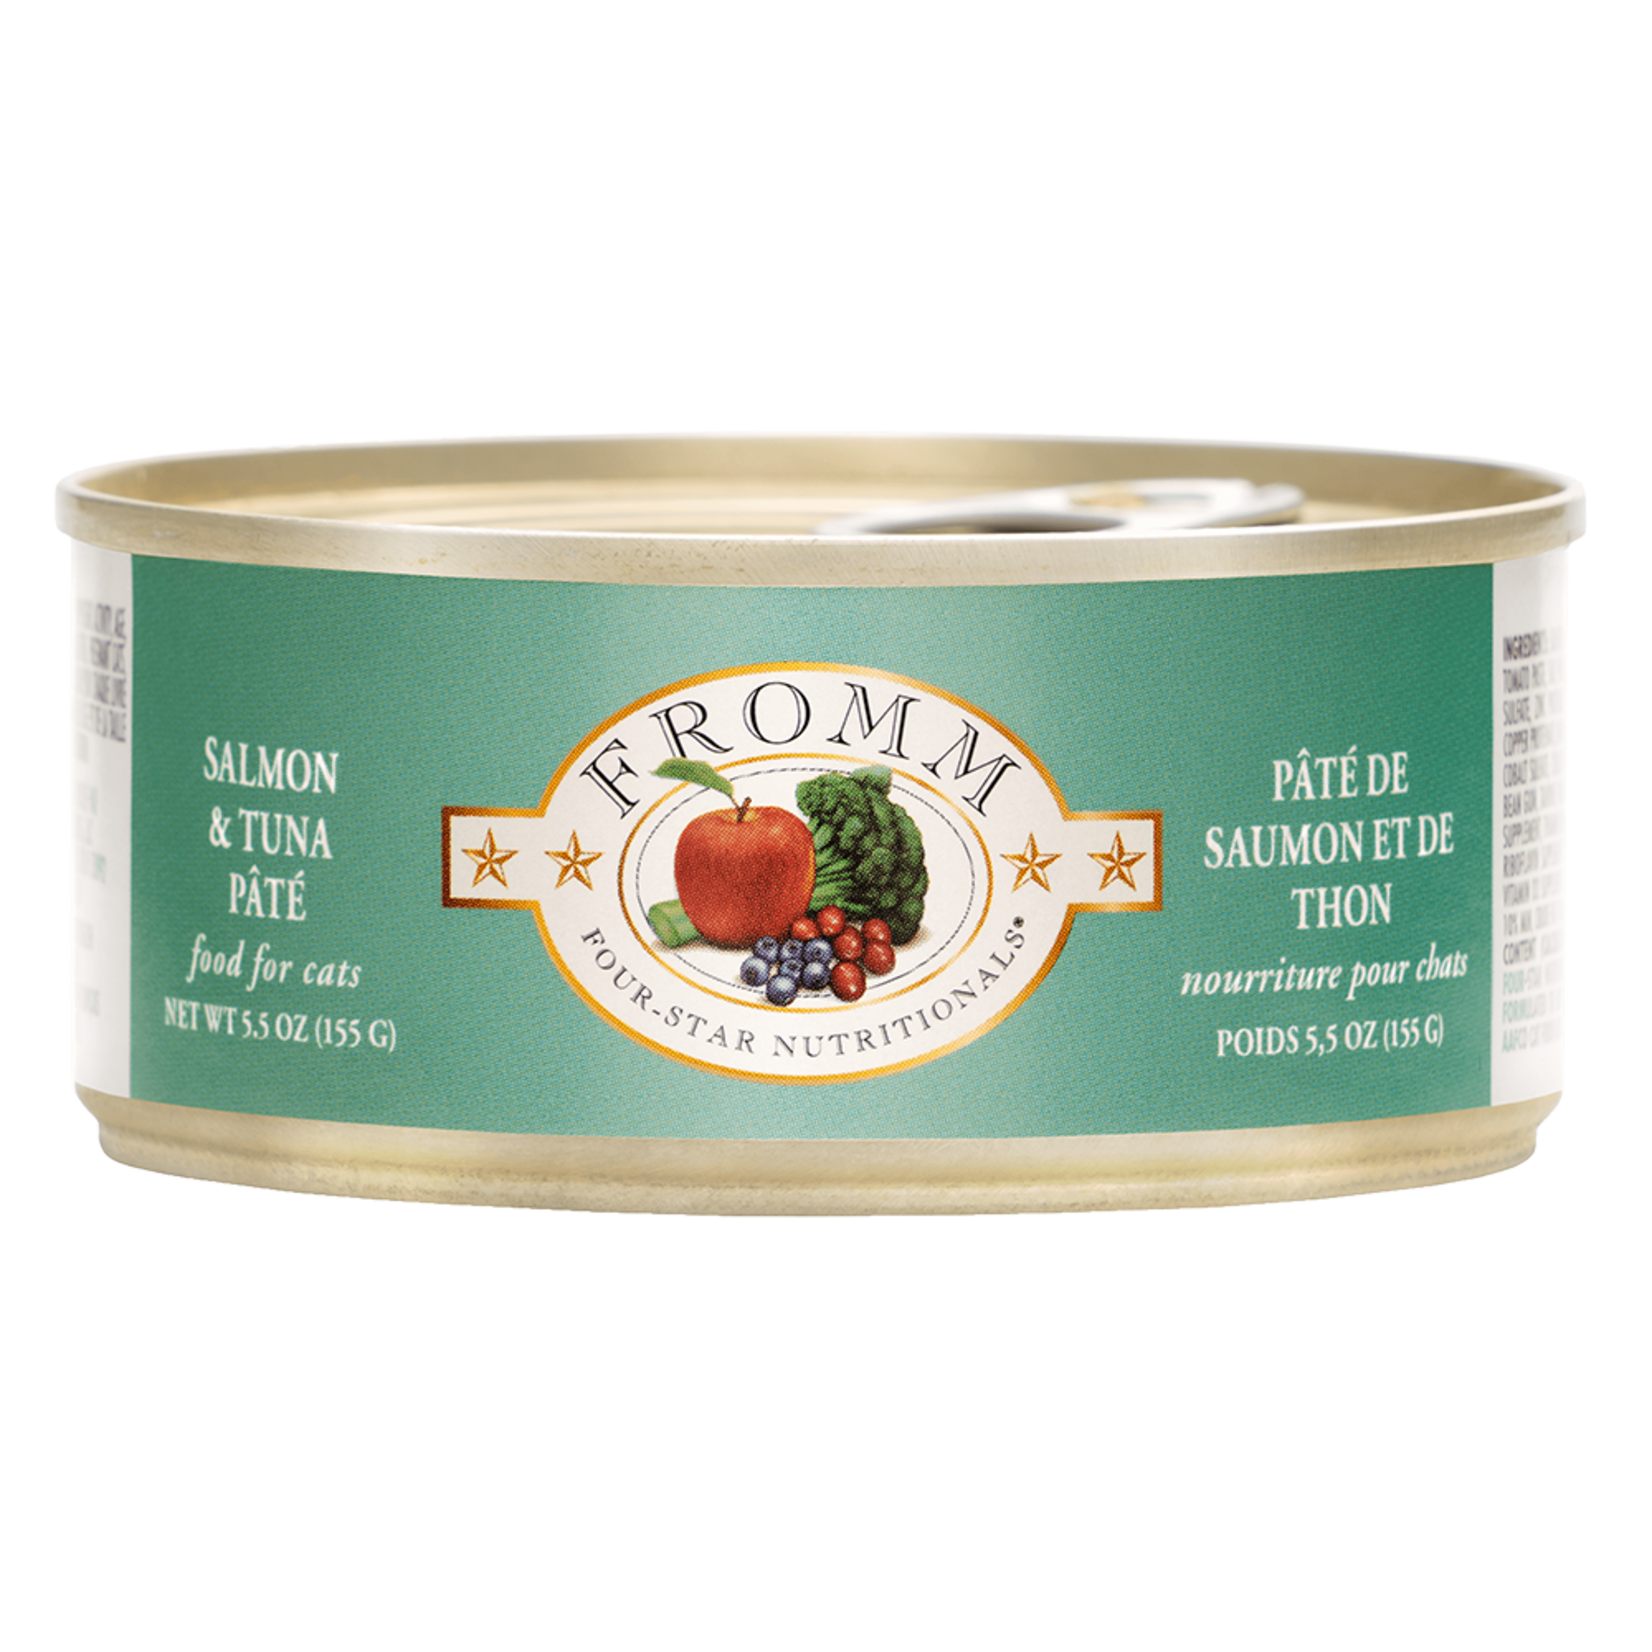 Fromm Family Fromm Salmon & Tuna Pâté Canned Cat Food 5.5oz